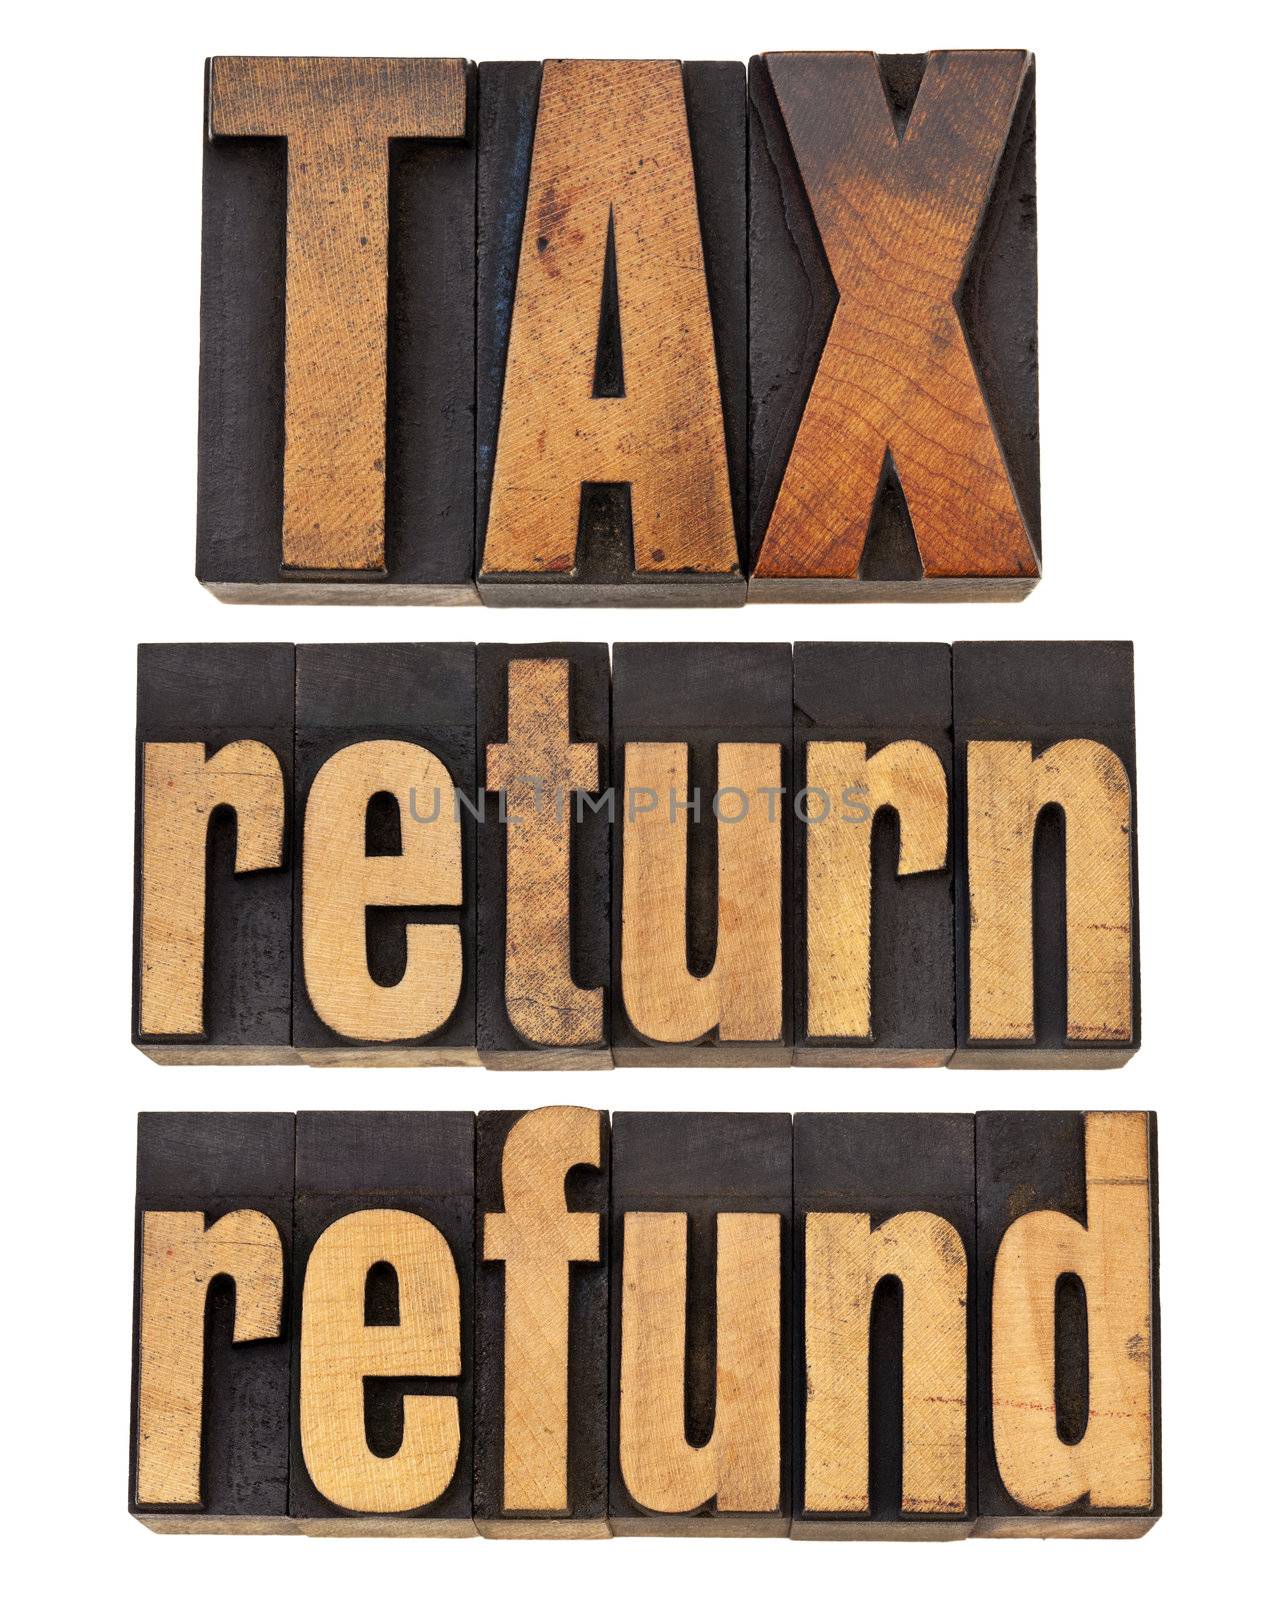 tax, return and refund by PixelsAway